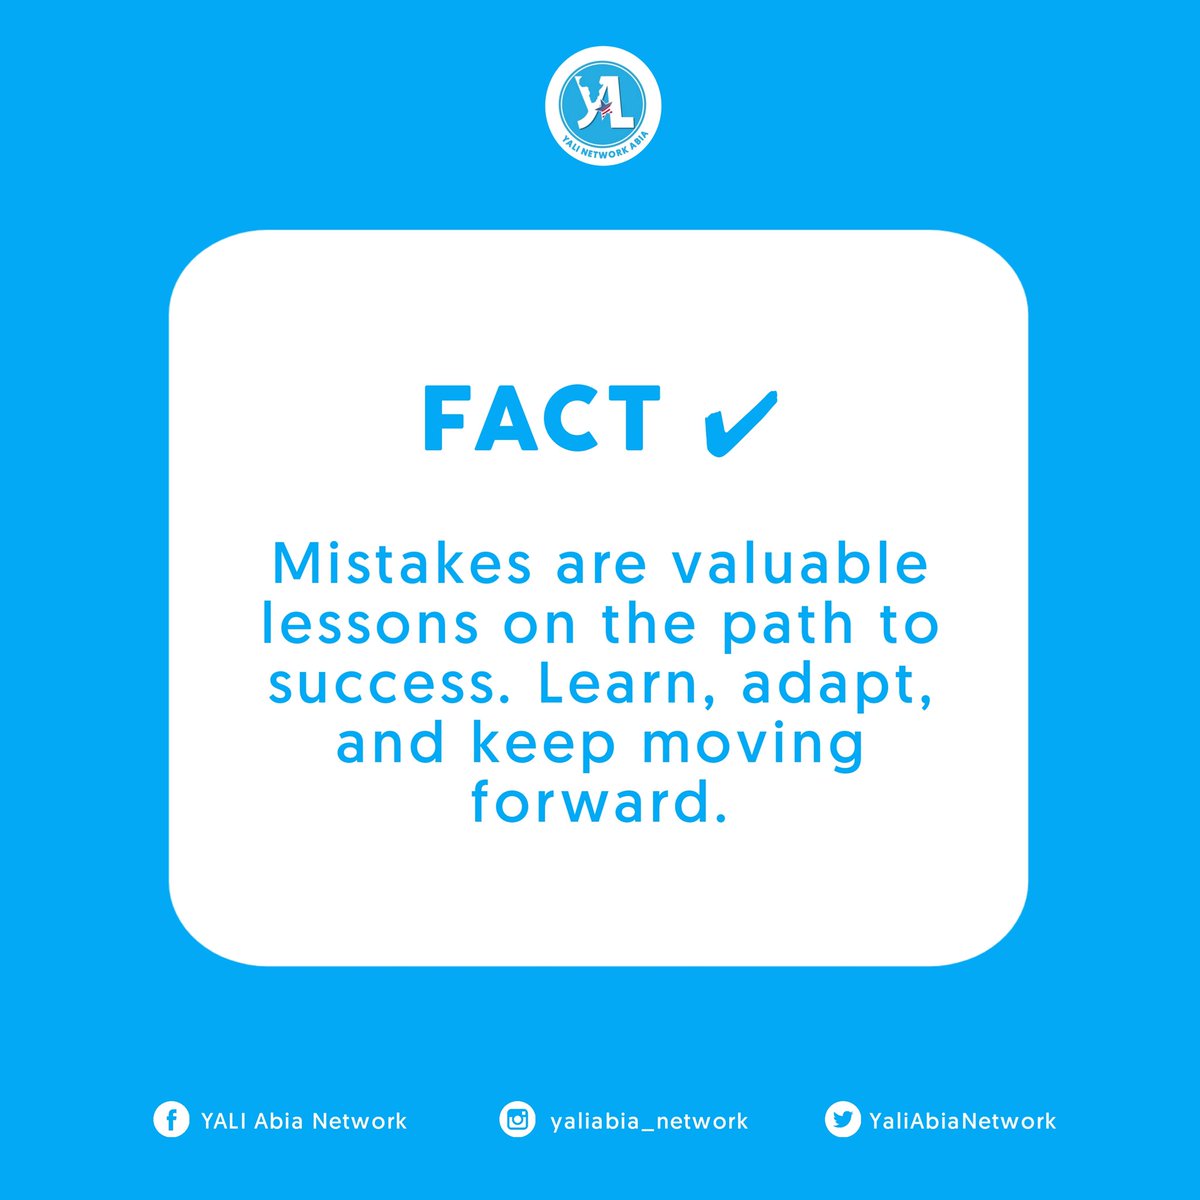 FACTS AND MYTH FRIDAY

❌Myth: 'Mistakes are a sign of failure.'

✅ Fact: 'Mistakes are valuable lessons on the path to success. Learn, adapt, and keep moving forward.'

#YaliAbiaNetwork
#TGIF
#FactsAndMyths 
#ChangeMakers